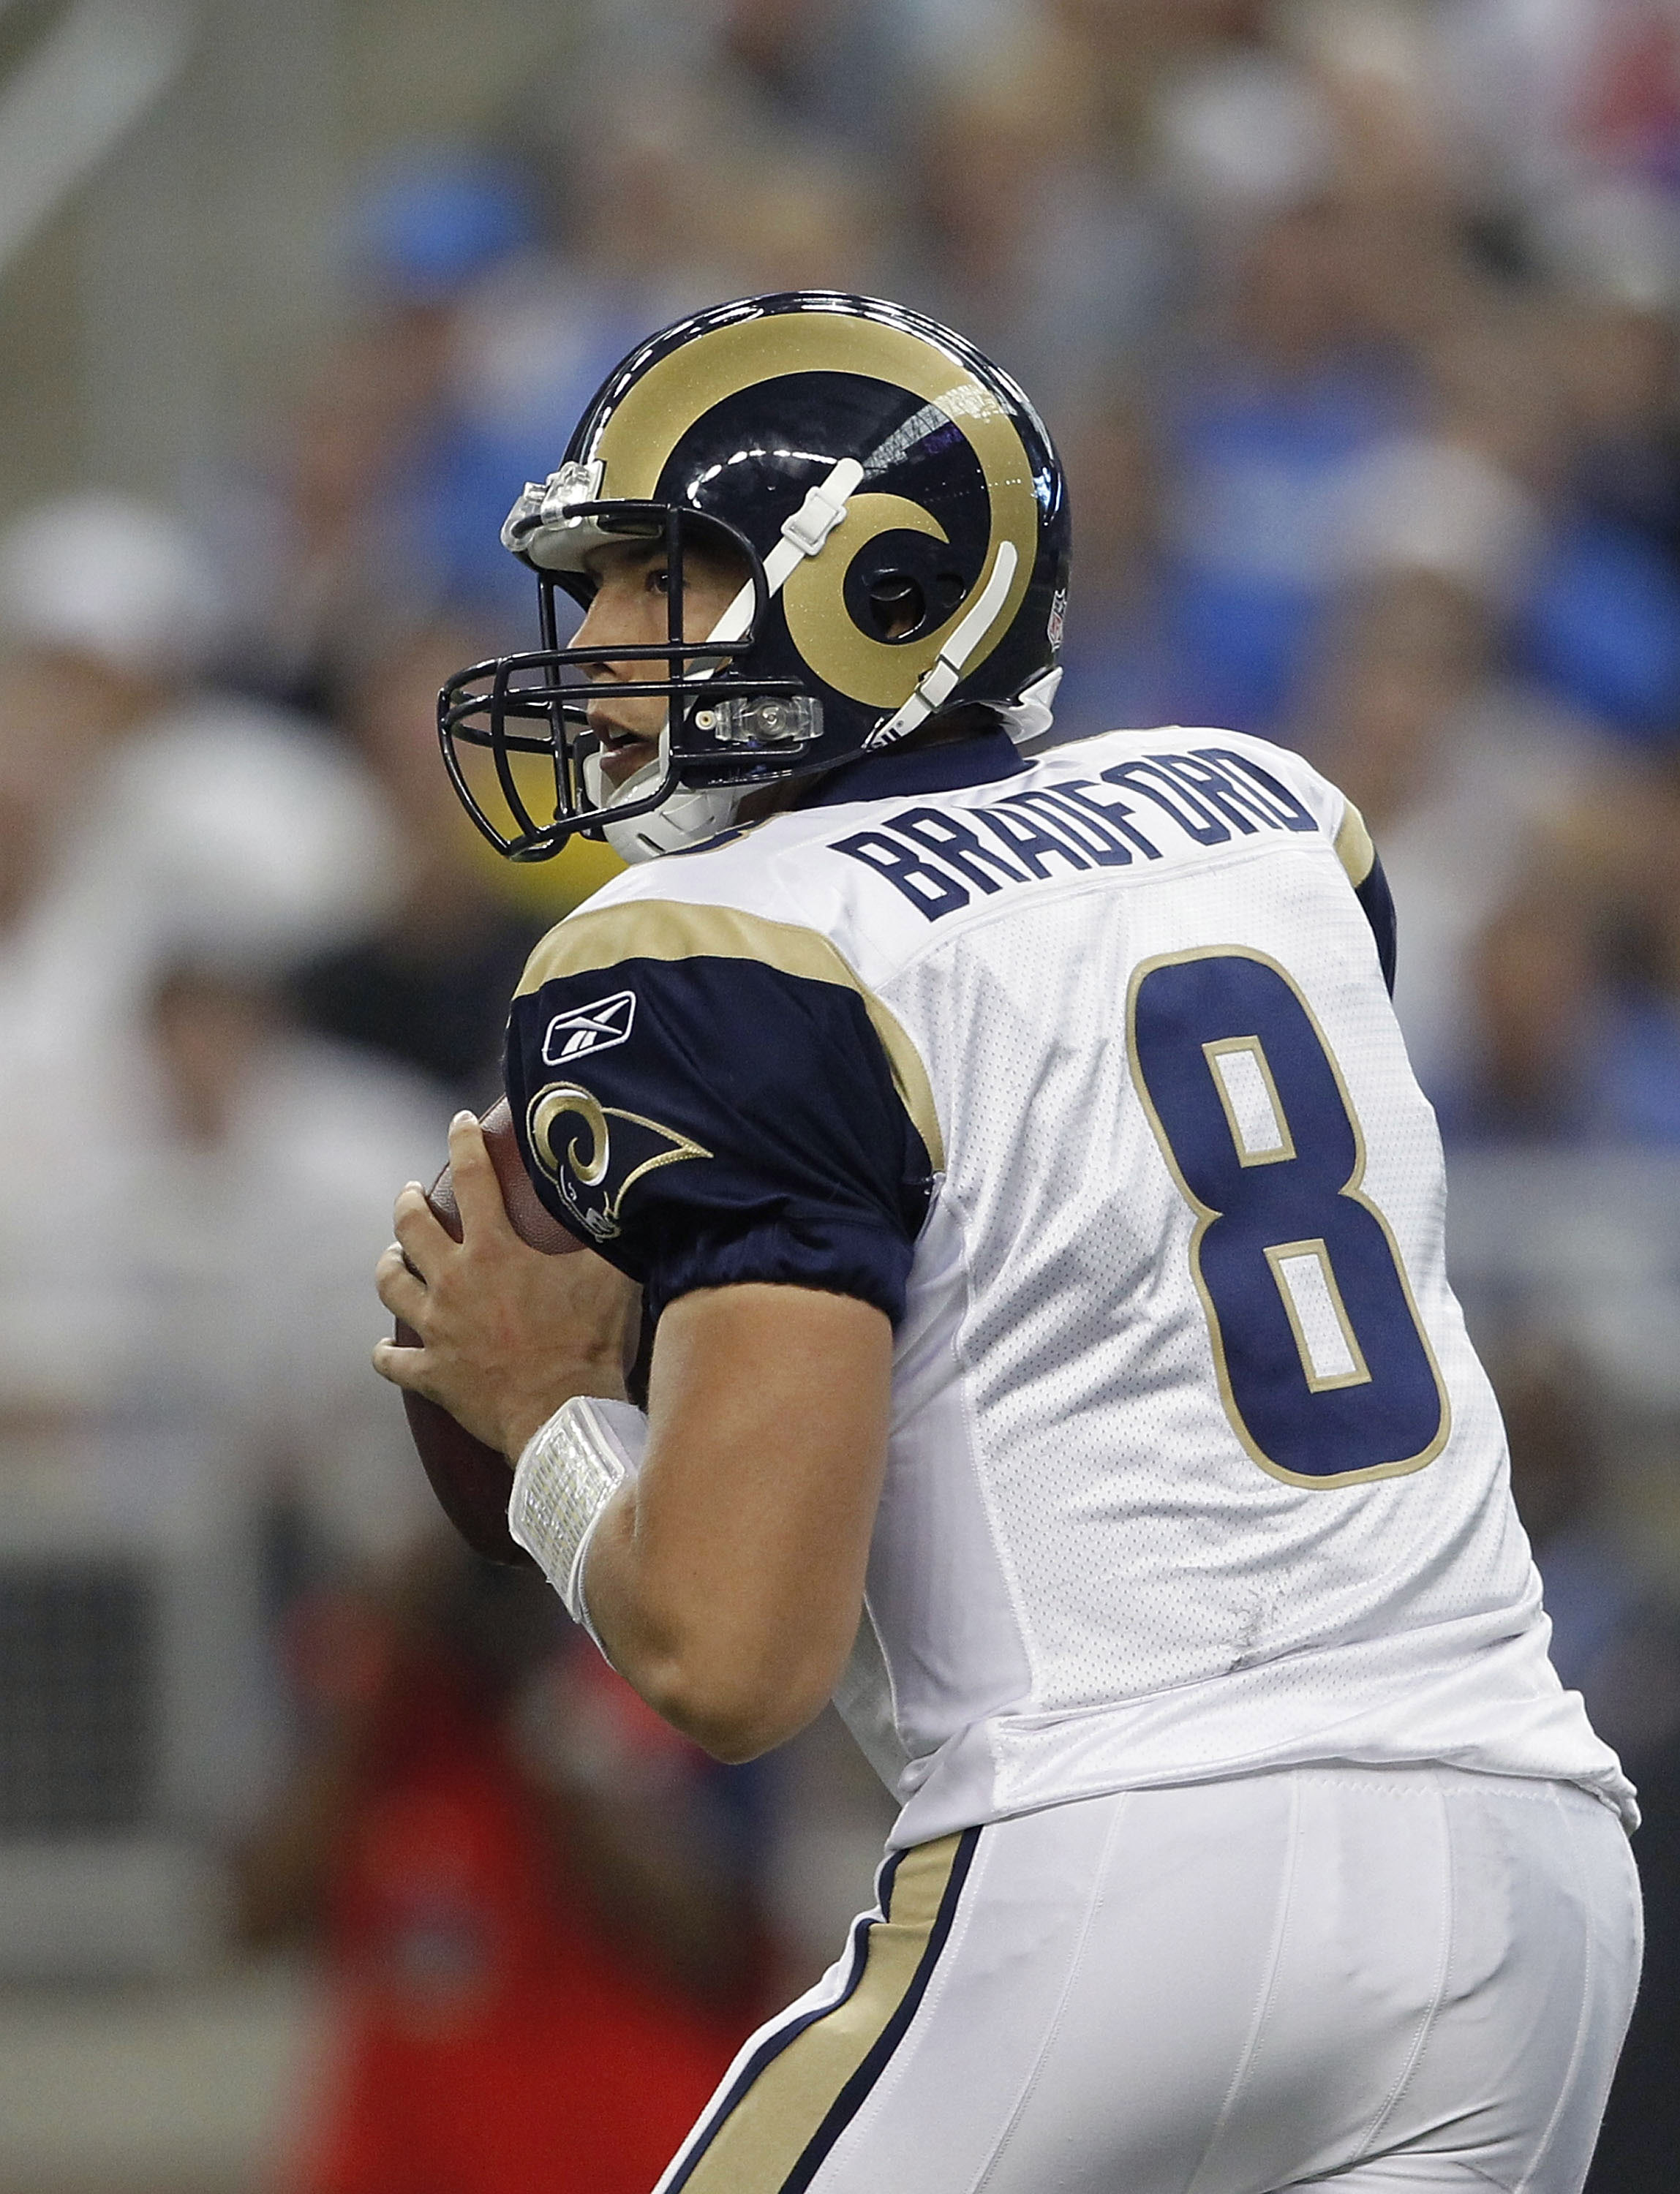 DETROIT - OCTOBER 10:  Sam Bradford #8 of the St. Louis Rams drops back to pass during the fourth quarter during the game against the Detroit Lions at Ford Field on October 10, 2010 in Detroit, Michigan. The Lions defeated the Rams 44-6.  (Photo by Leon H